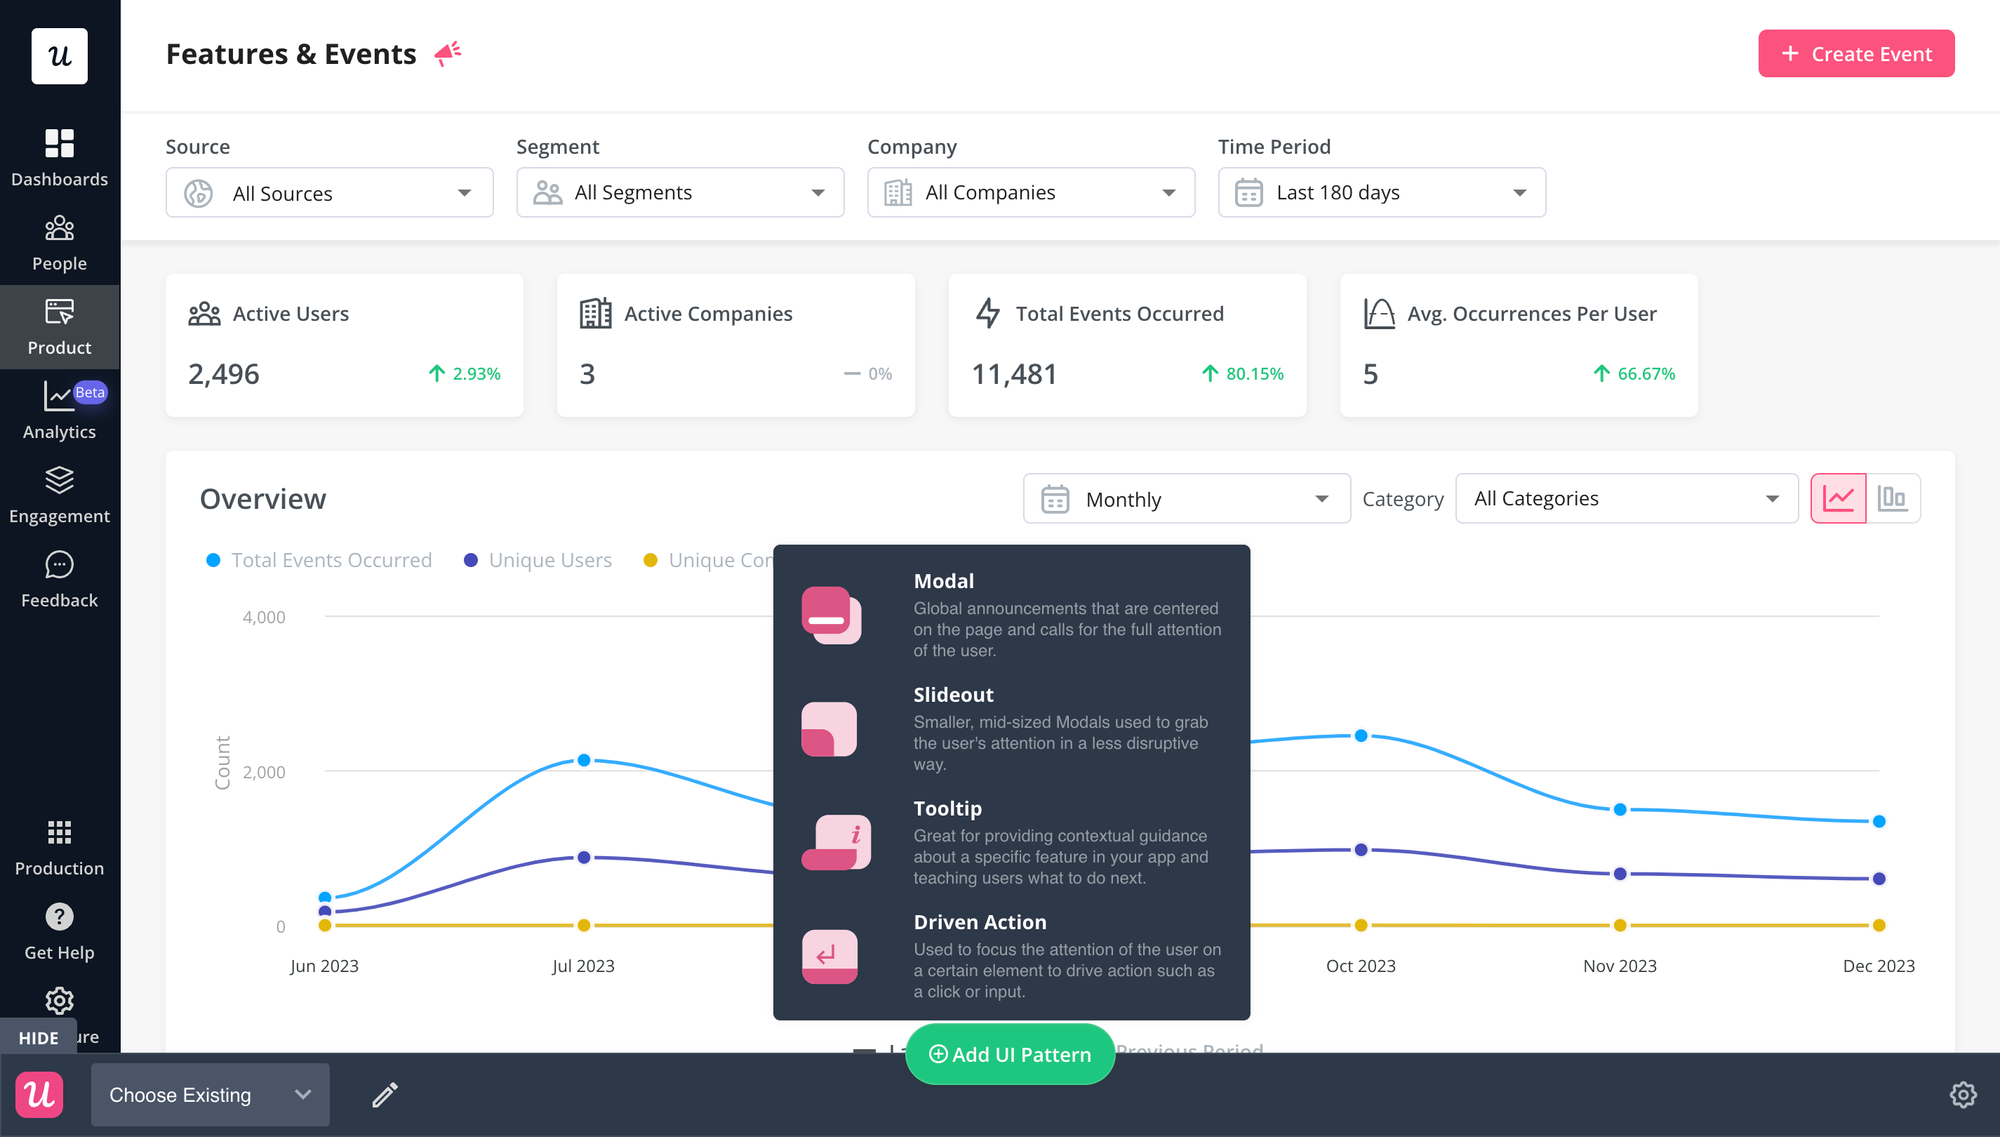 Access and customize UI elements for effective onboarding. 